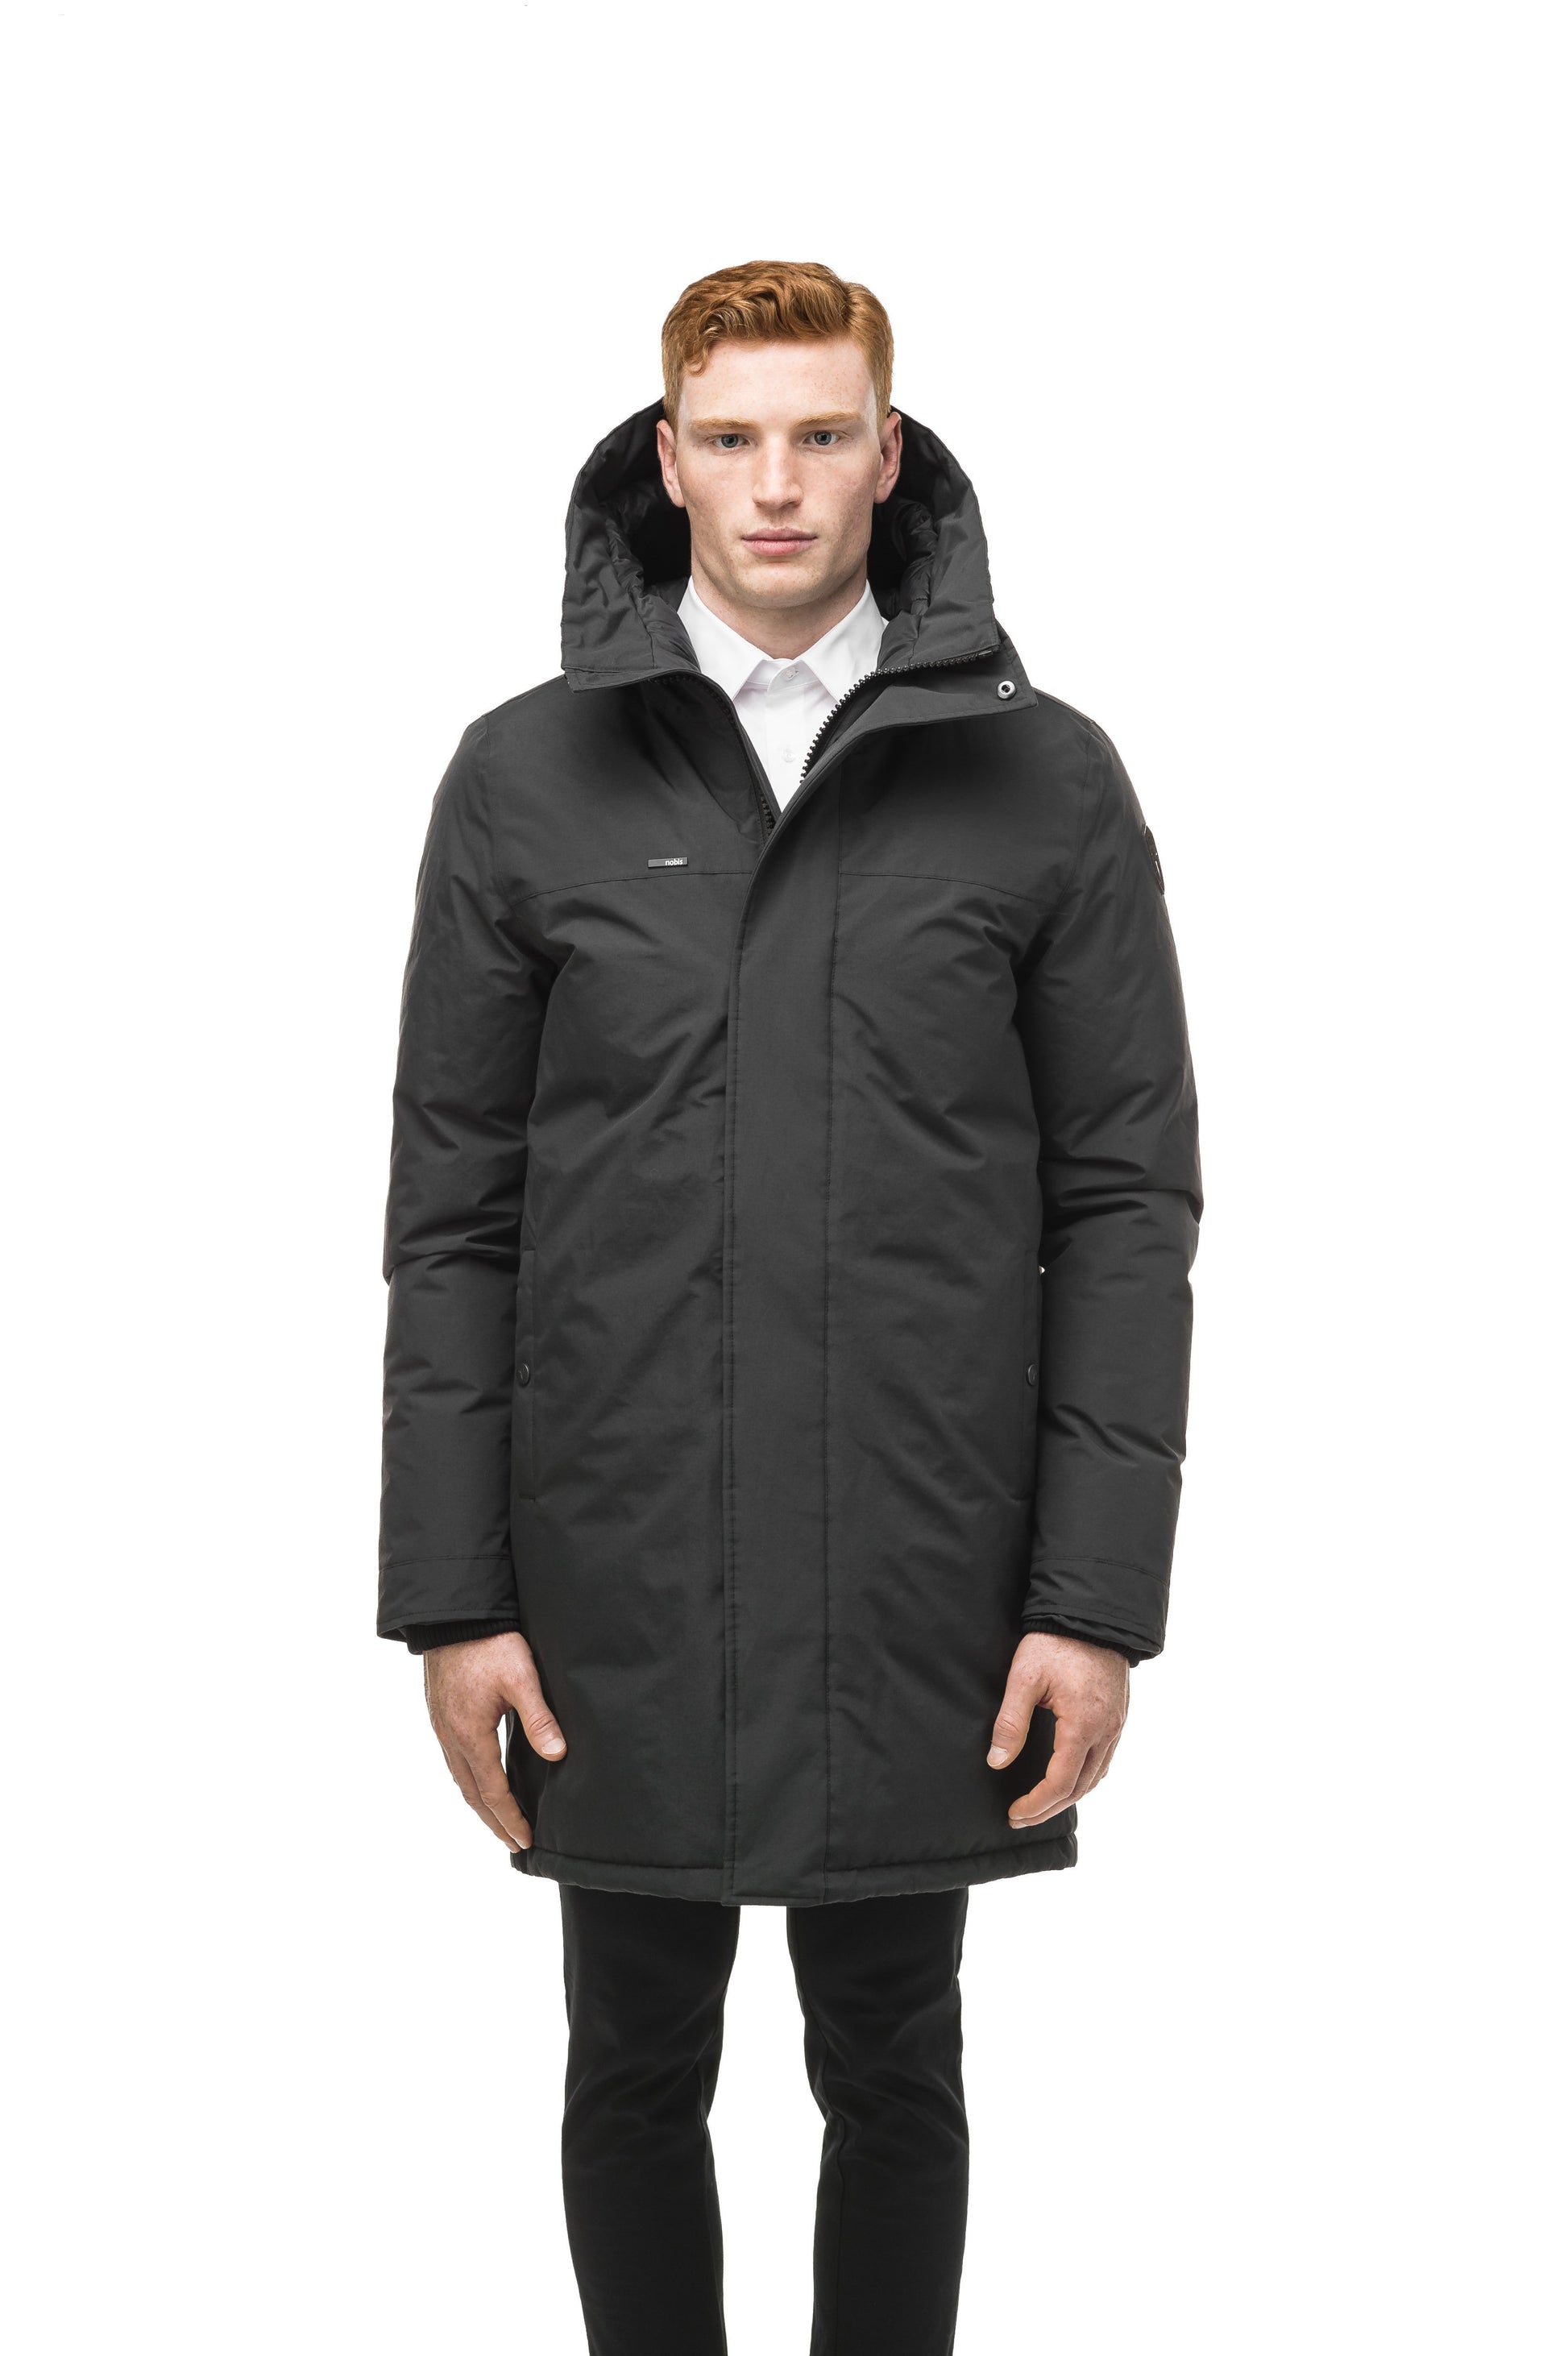 Classic men's down filled parka with attached fur free hood in Black